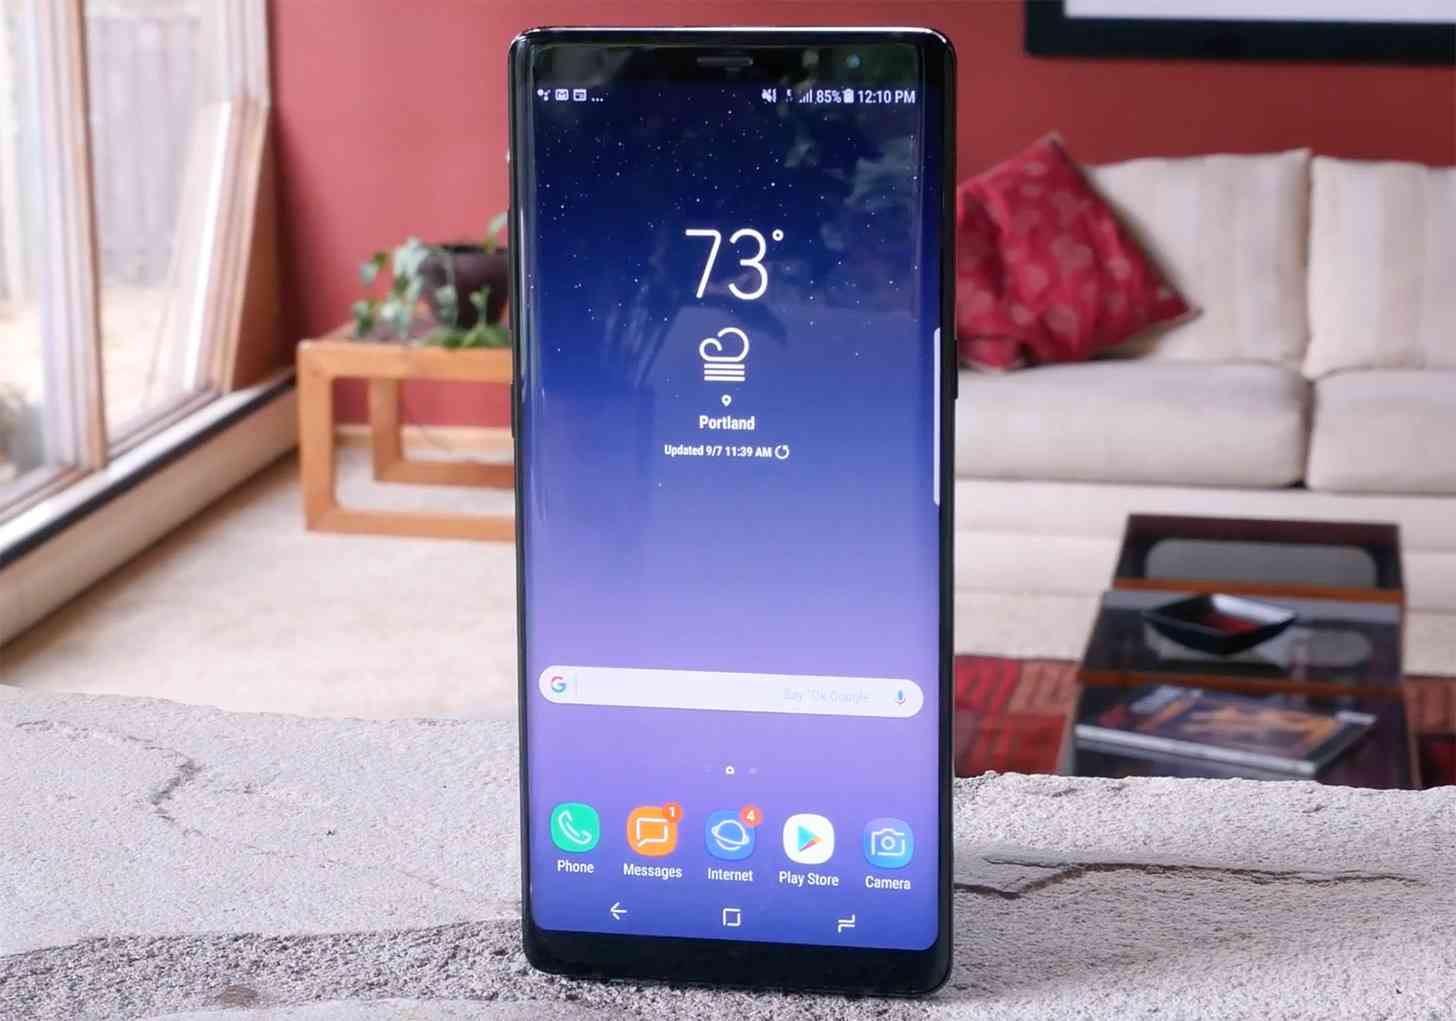 Samsung Galaxy Note 8 hands-on video